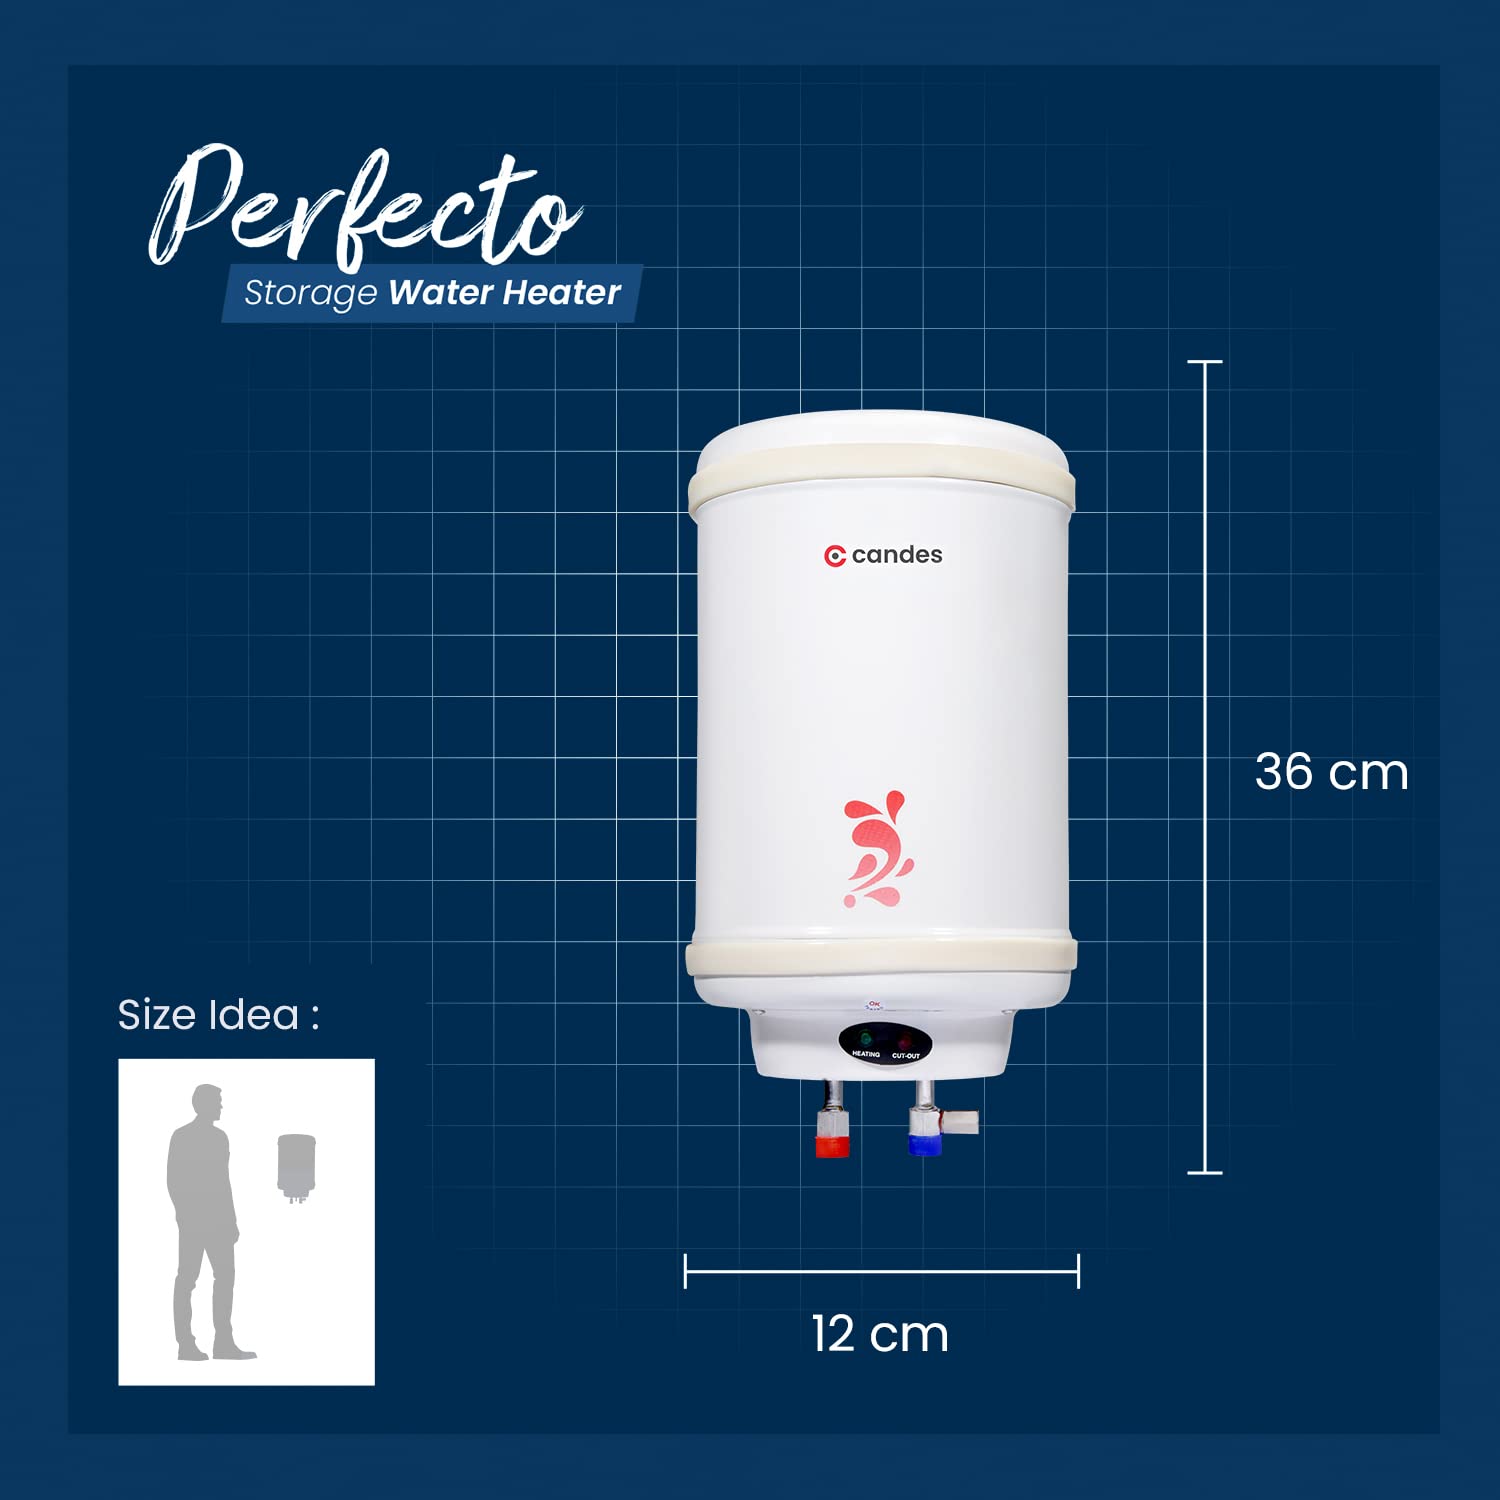 Candes Geyser 6 Litre | 1 Year Warranty | Water Heater for Home, Water Geyser, Water Heater, Electric Geyser, 5 Star Rated Automatic Instant Storage Water Heater, 2KW - Perfecto (Ivory)